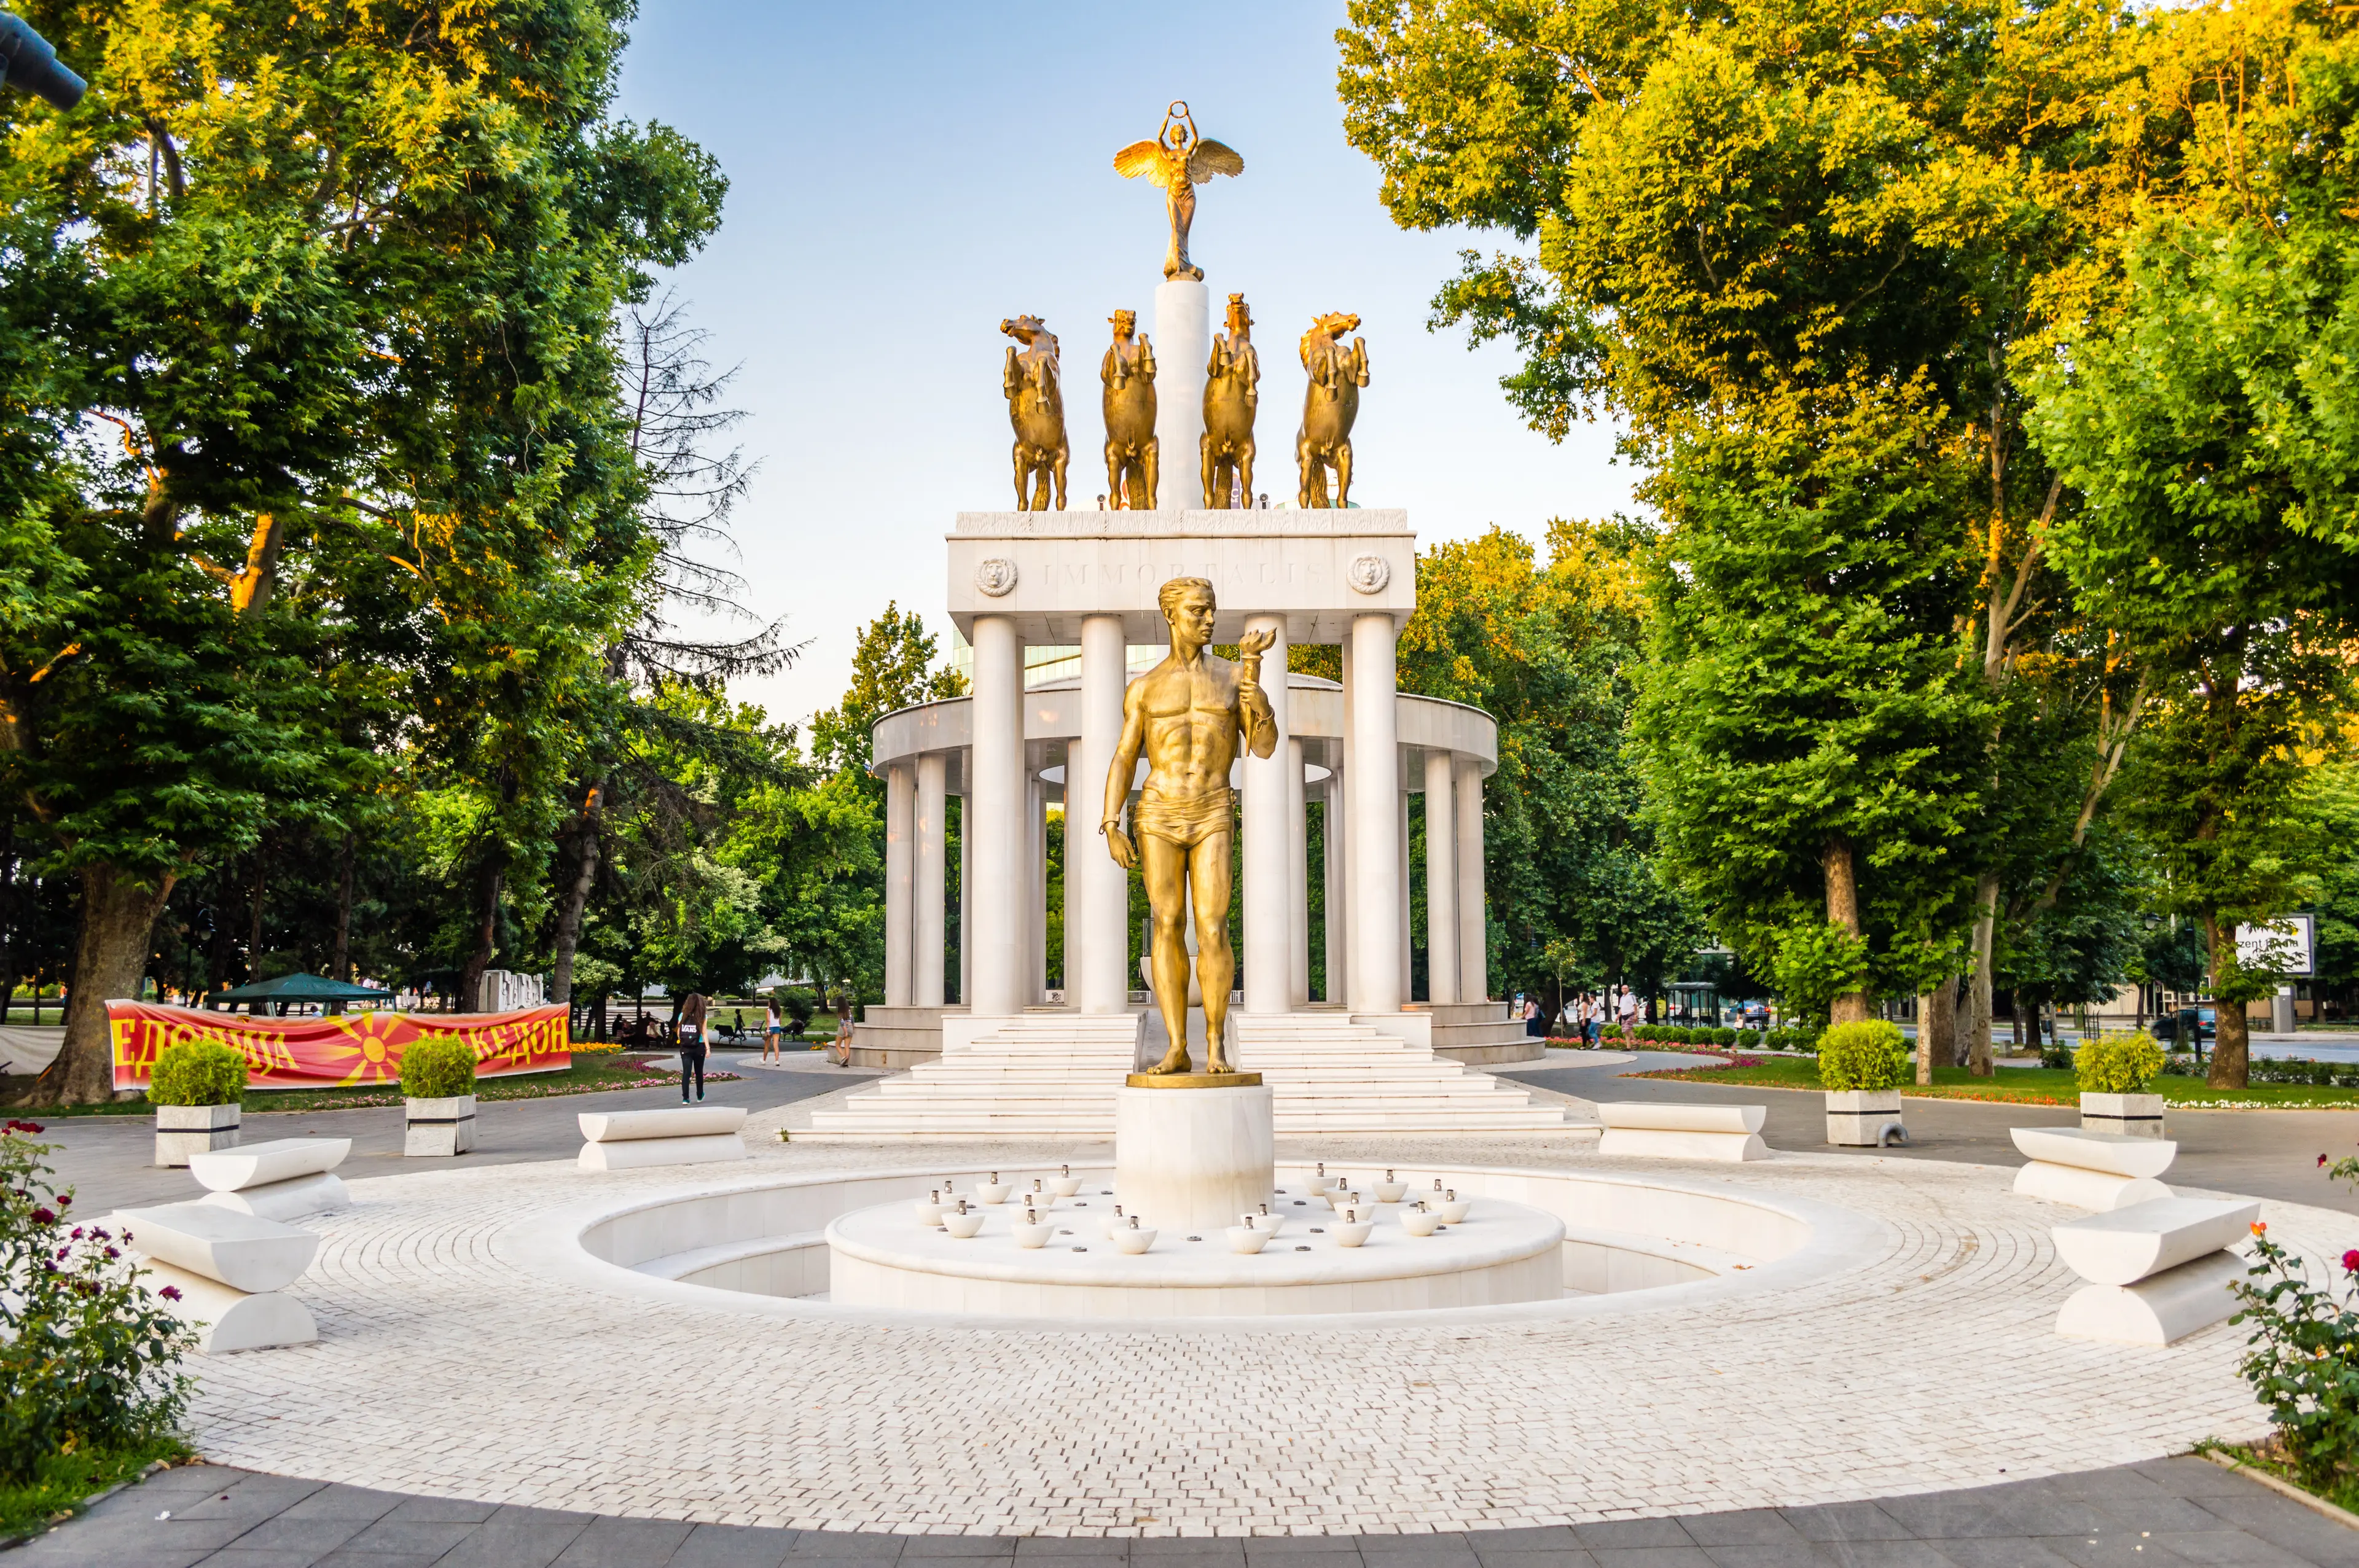 4-Day Hidden Gems & Relaxation Tour in Skopje with Friends